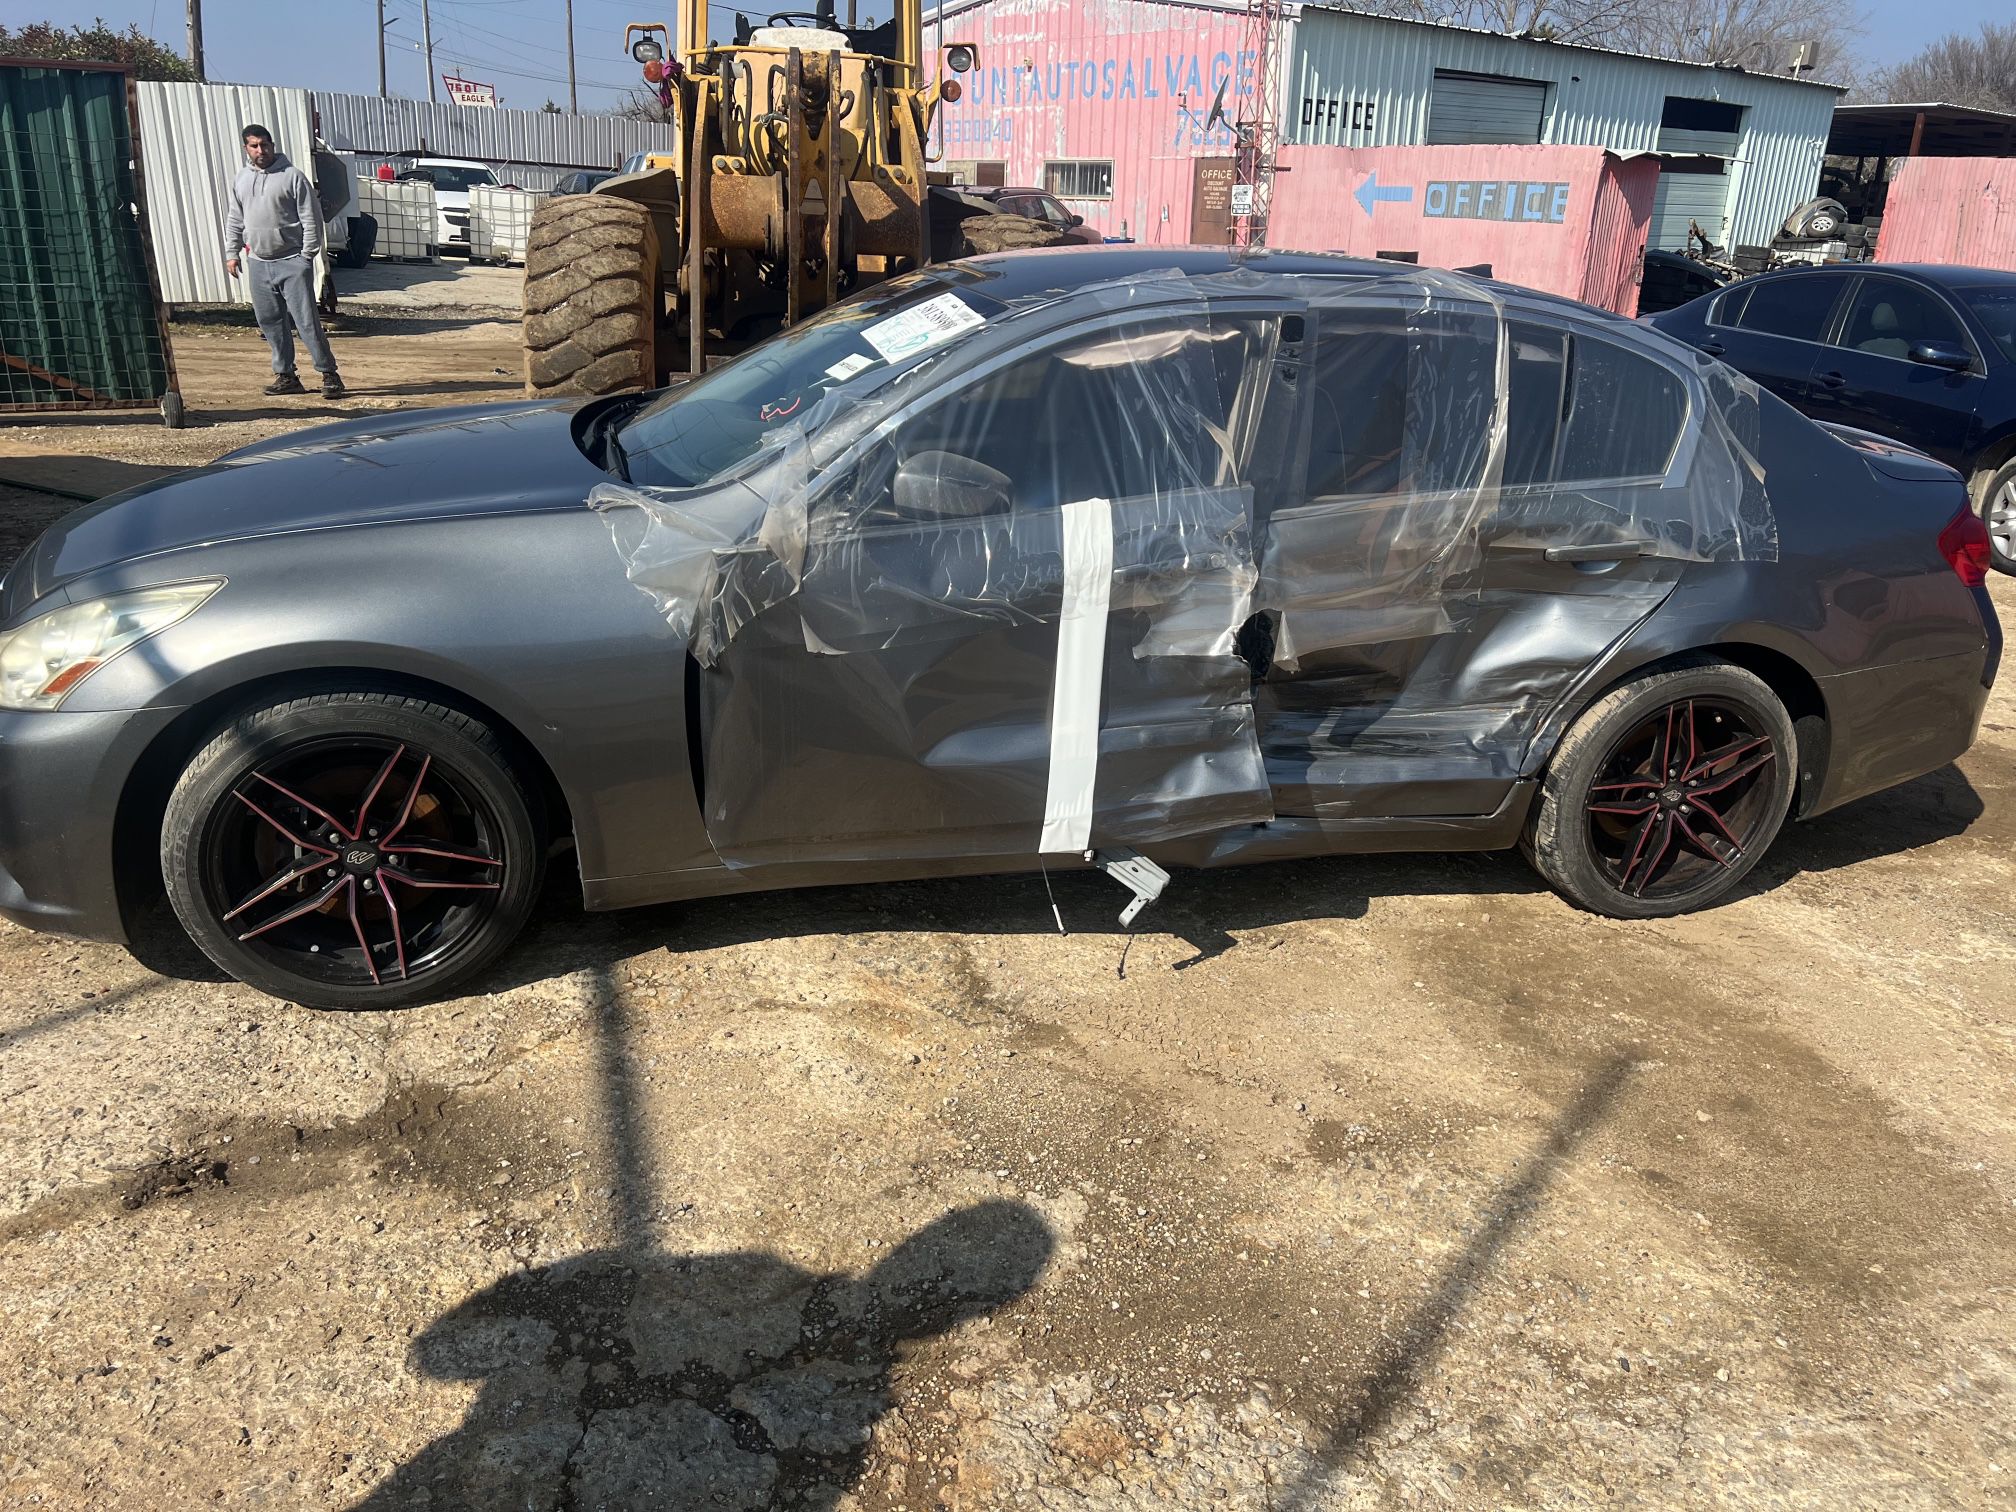 2012 Infiniti G25 - Parts Only #BA9